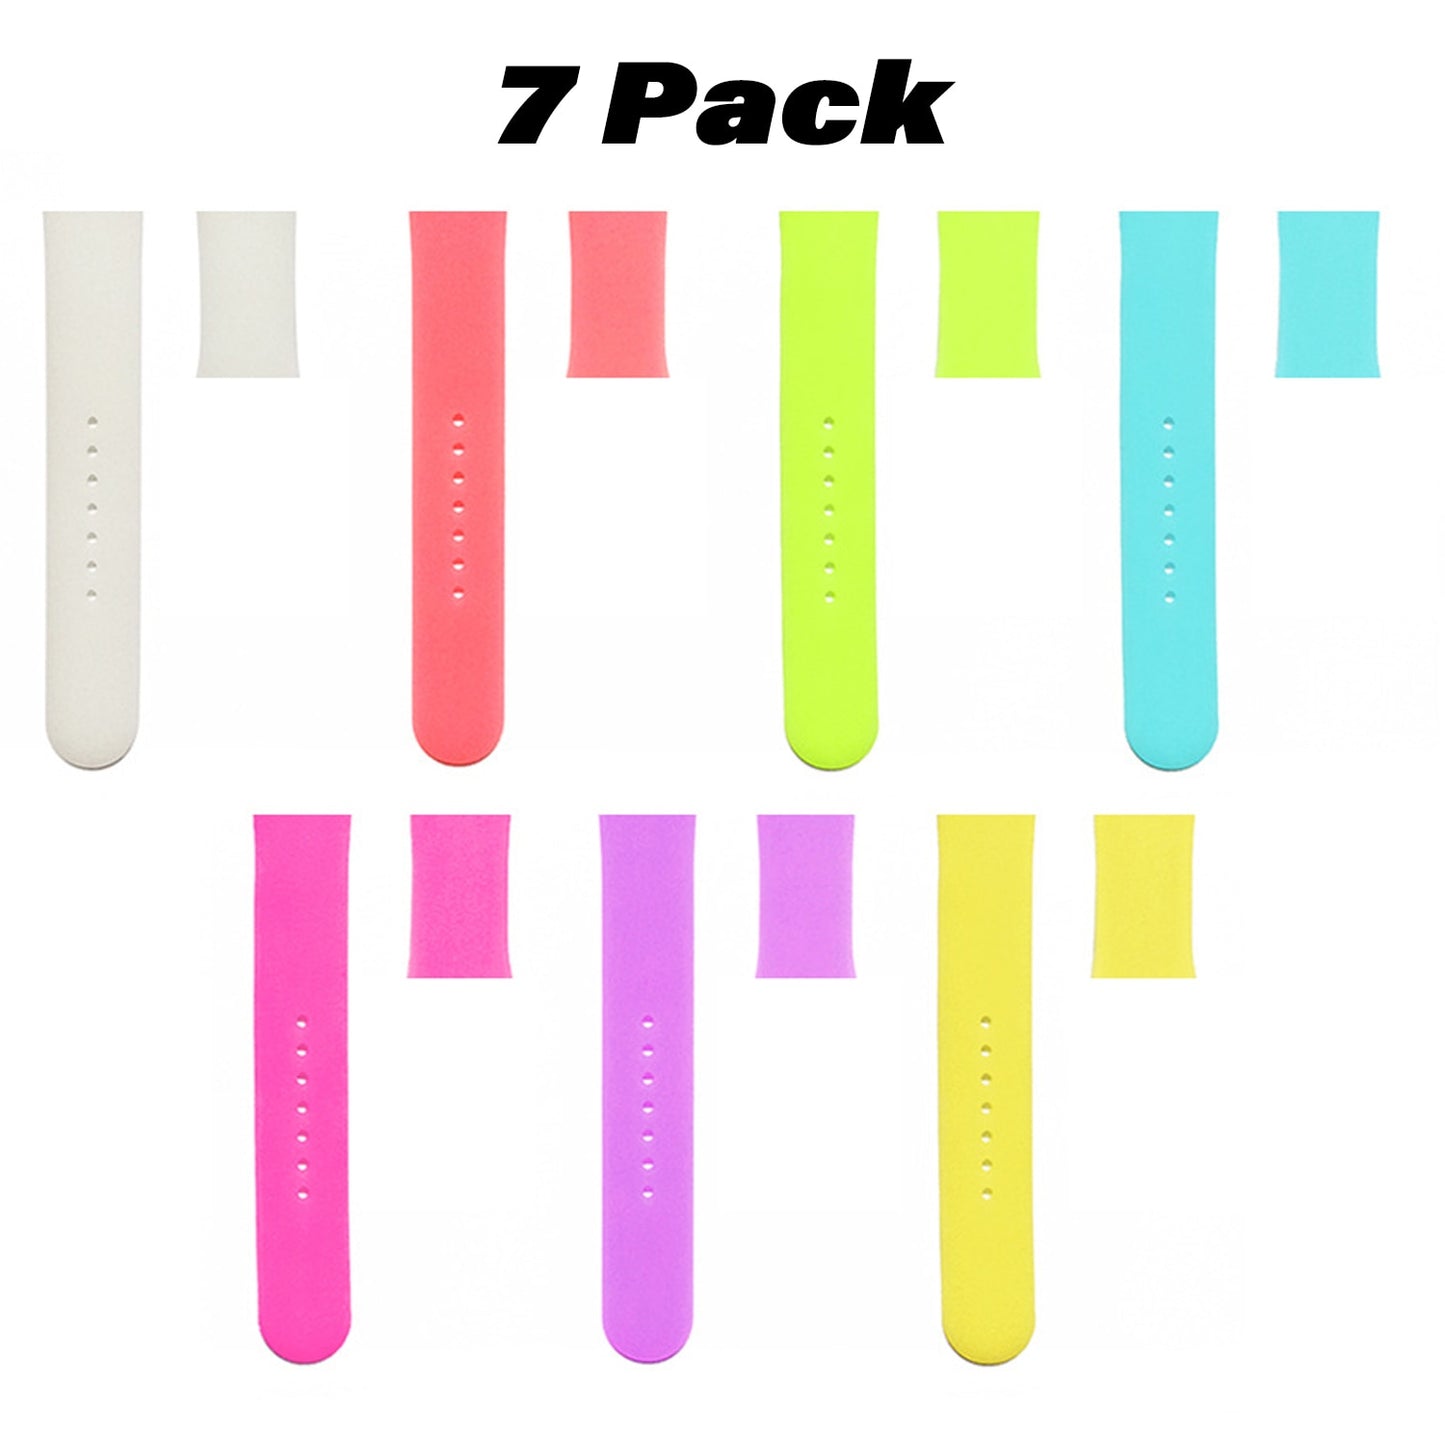 Luminous Silicone Strap For Apple Watch Band Ultra 49mm 8 7 45/41mm Sport Loop Bracelet For Iwatch 6 5 4 Se 44mm 42mm 40mm 38mm - China / luminous 7packs / 38 40 41mm  SM - United States / luminous 7packs / 38 40 41mm  SM - China / luminous 7packs / 38 40 41mm  ML - United States / luminous 7packs / 38 40 41mm  ML - China / luminous 7packs / 42 44 45 49mm  SM - United States / luminous 7packs / 42 44 45 49mm  SM - China / luminous 7packs / 42 44 45 49mm  ML - United States / luminous 7packs /...